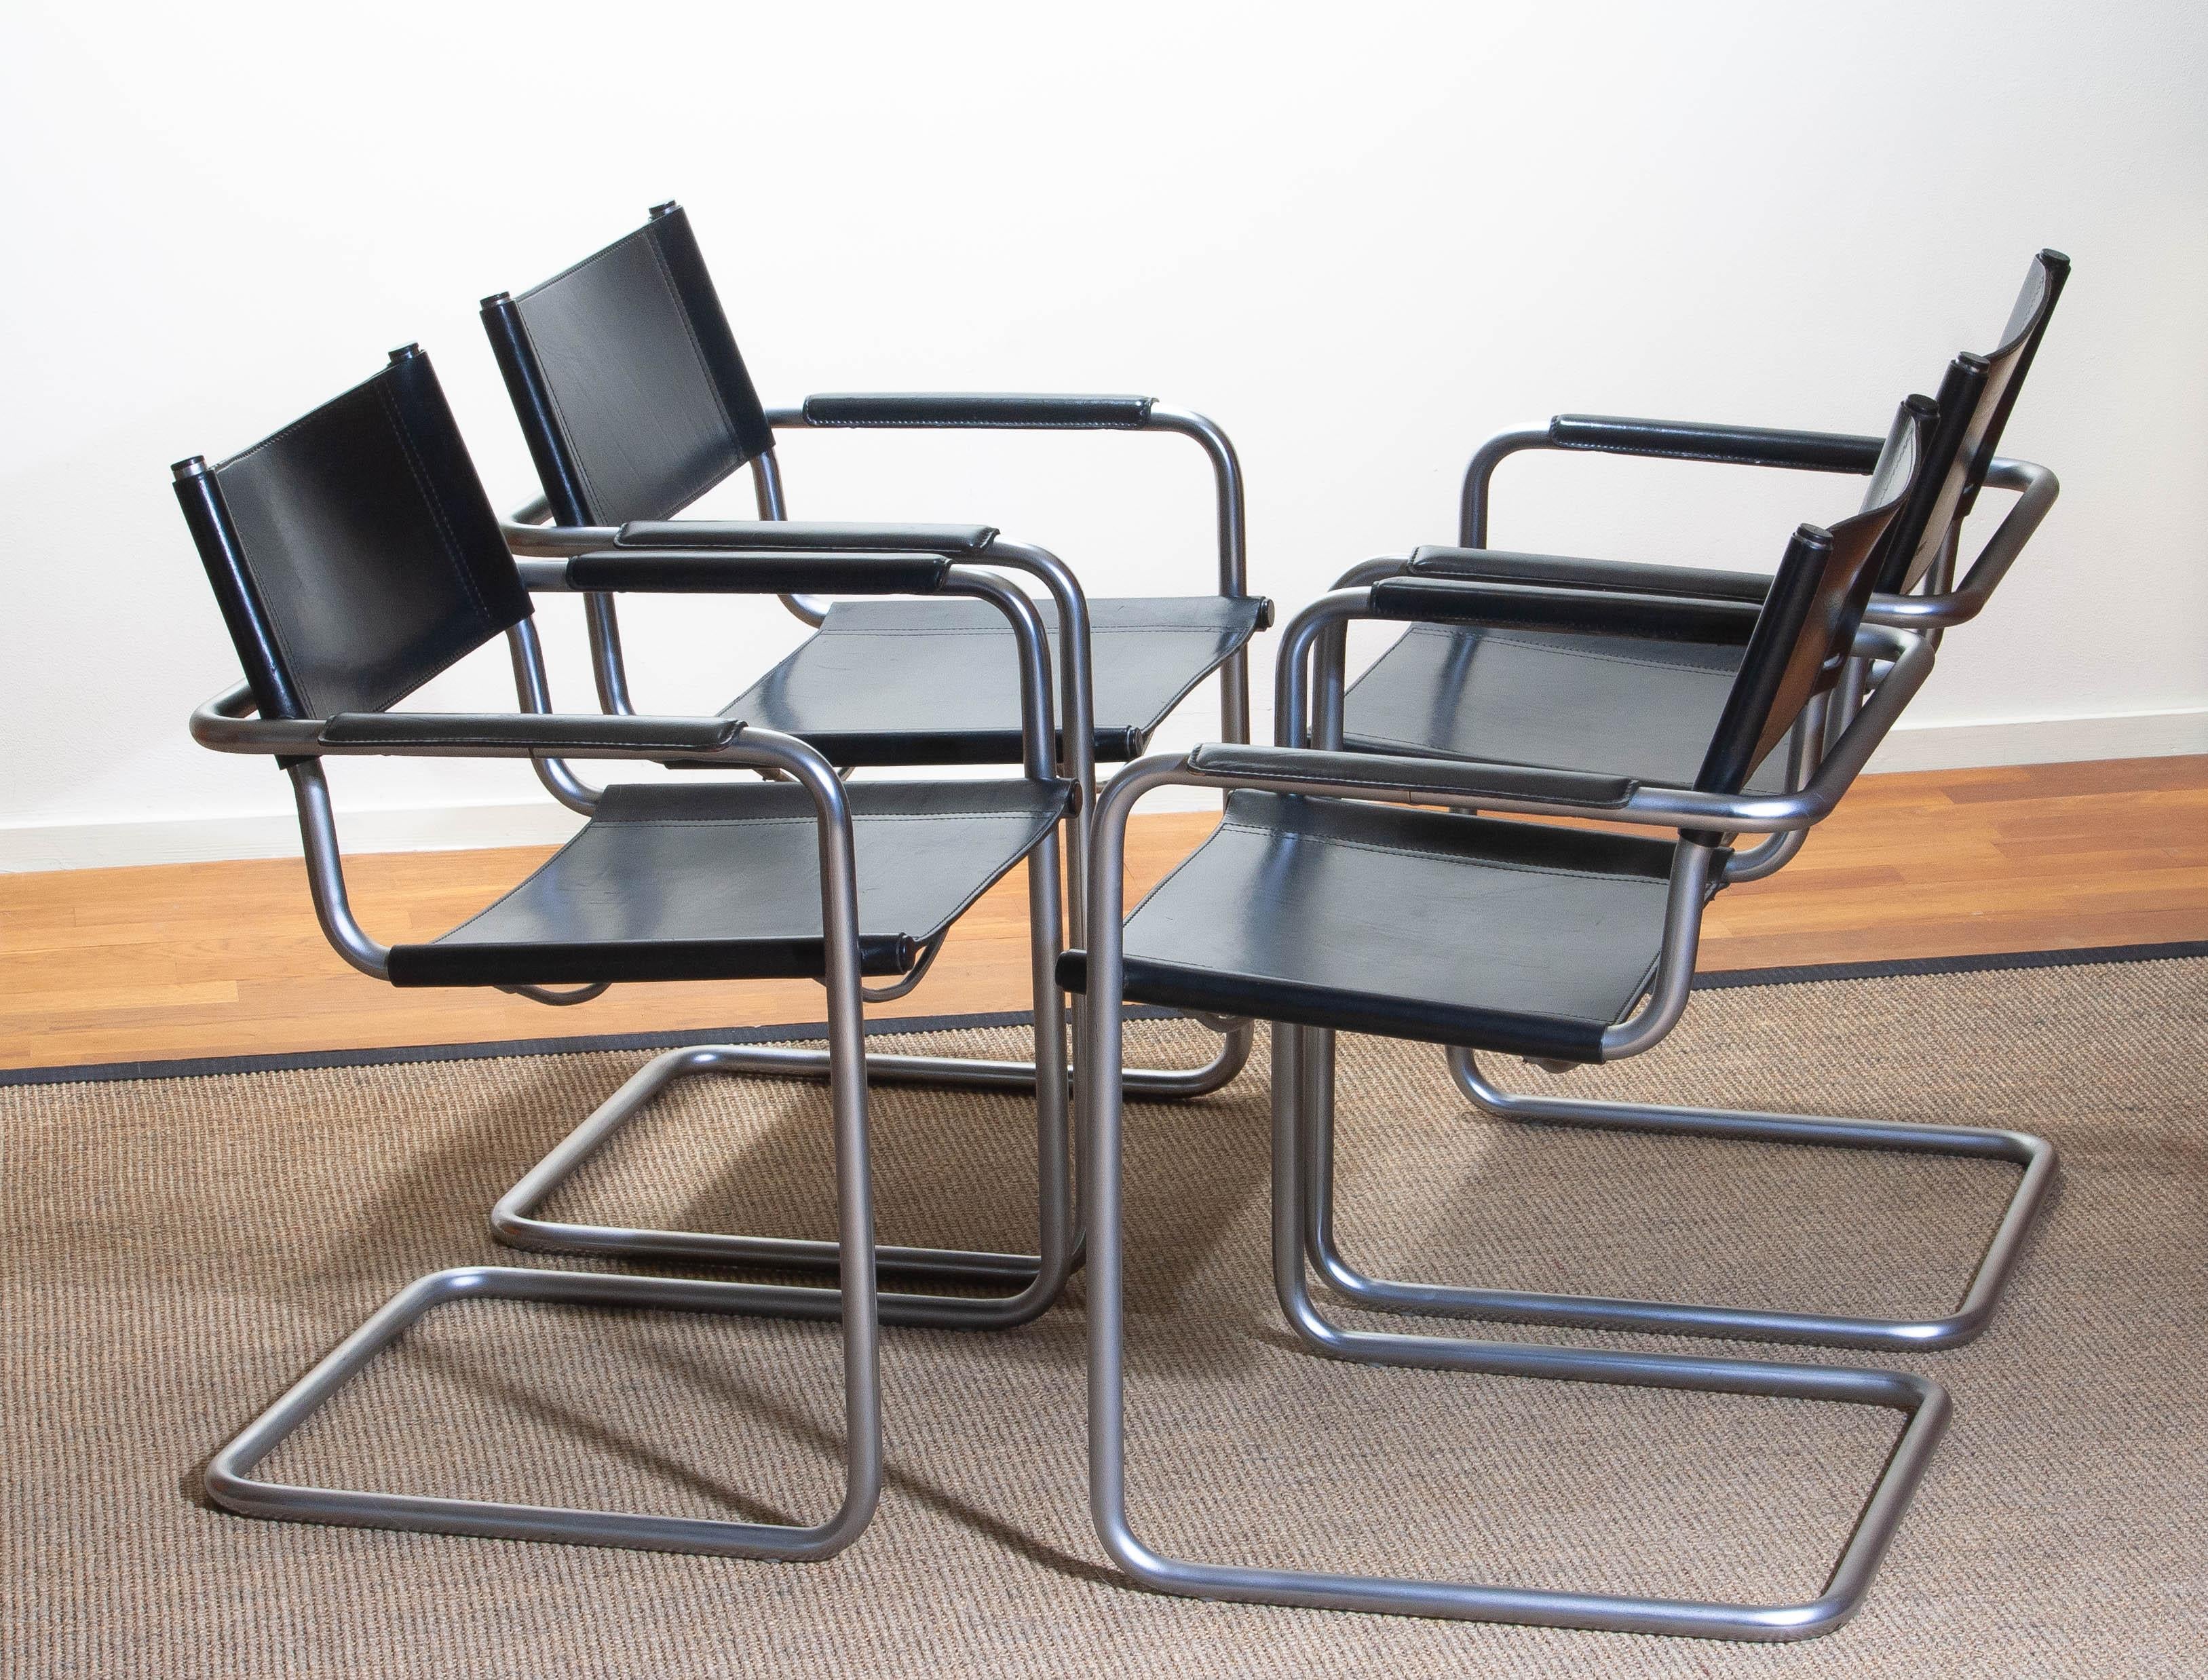 1970, perfect set of four dining or office chairs made by Matteo Grassi, Italy.
The chairs have tubular titanium look steel frames with sturdy black leather seating and backrest.
They are signed on the back of the backrest.
Overall condition is